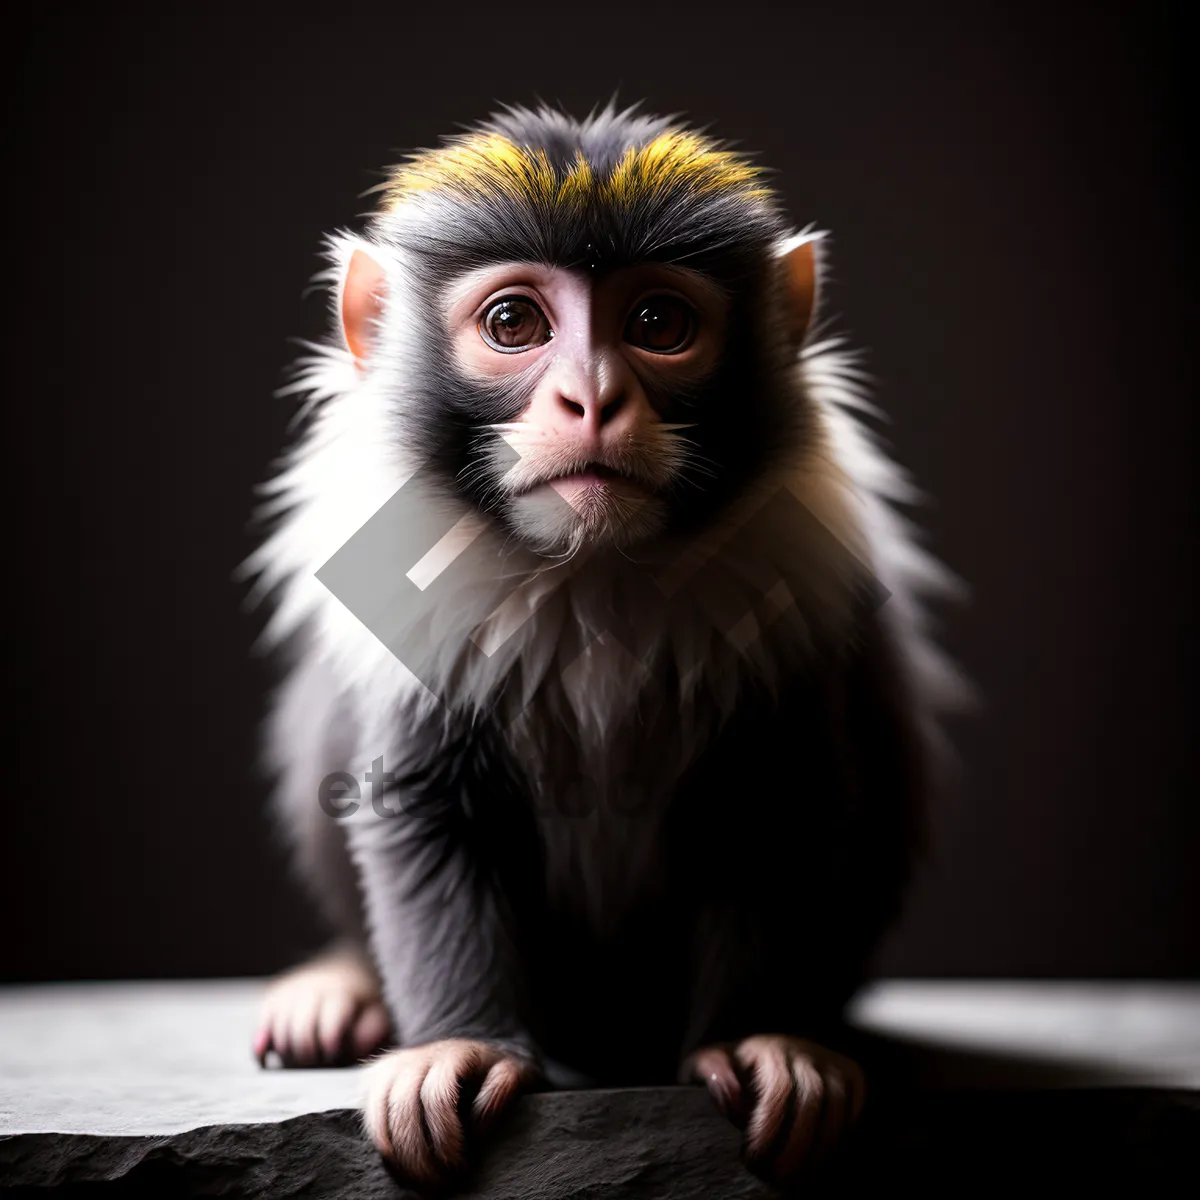 Picture of Adorable Marmoset Monkey Portrait at Zoo